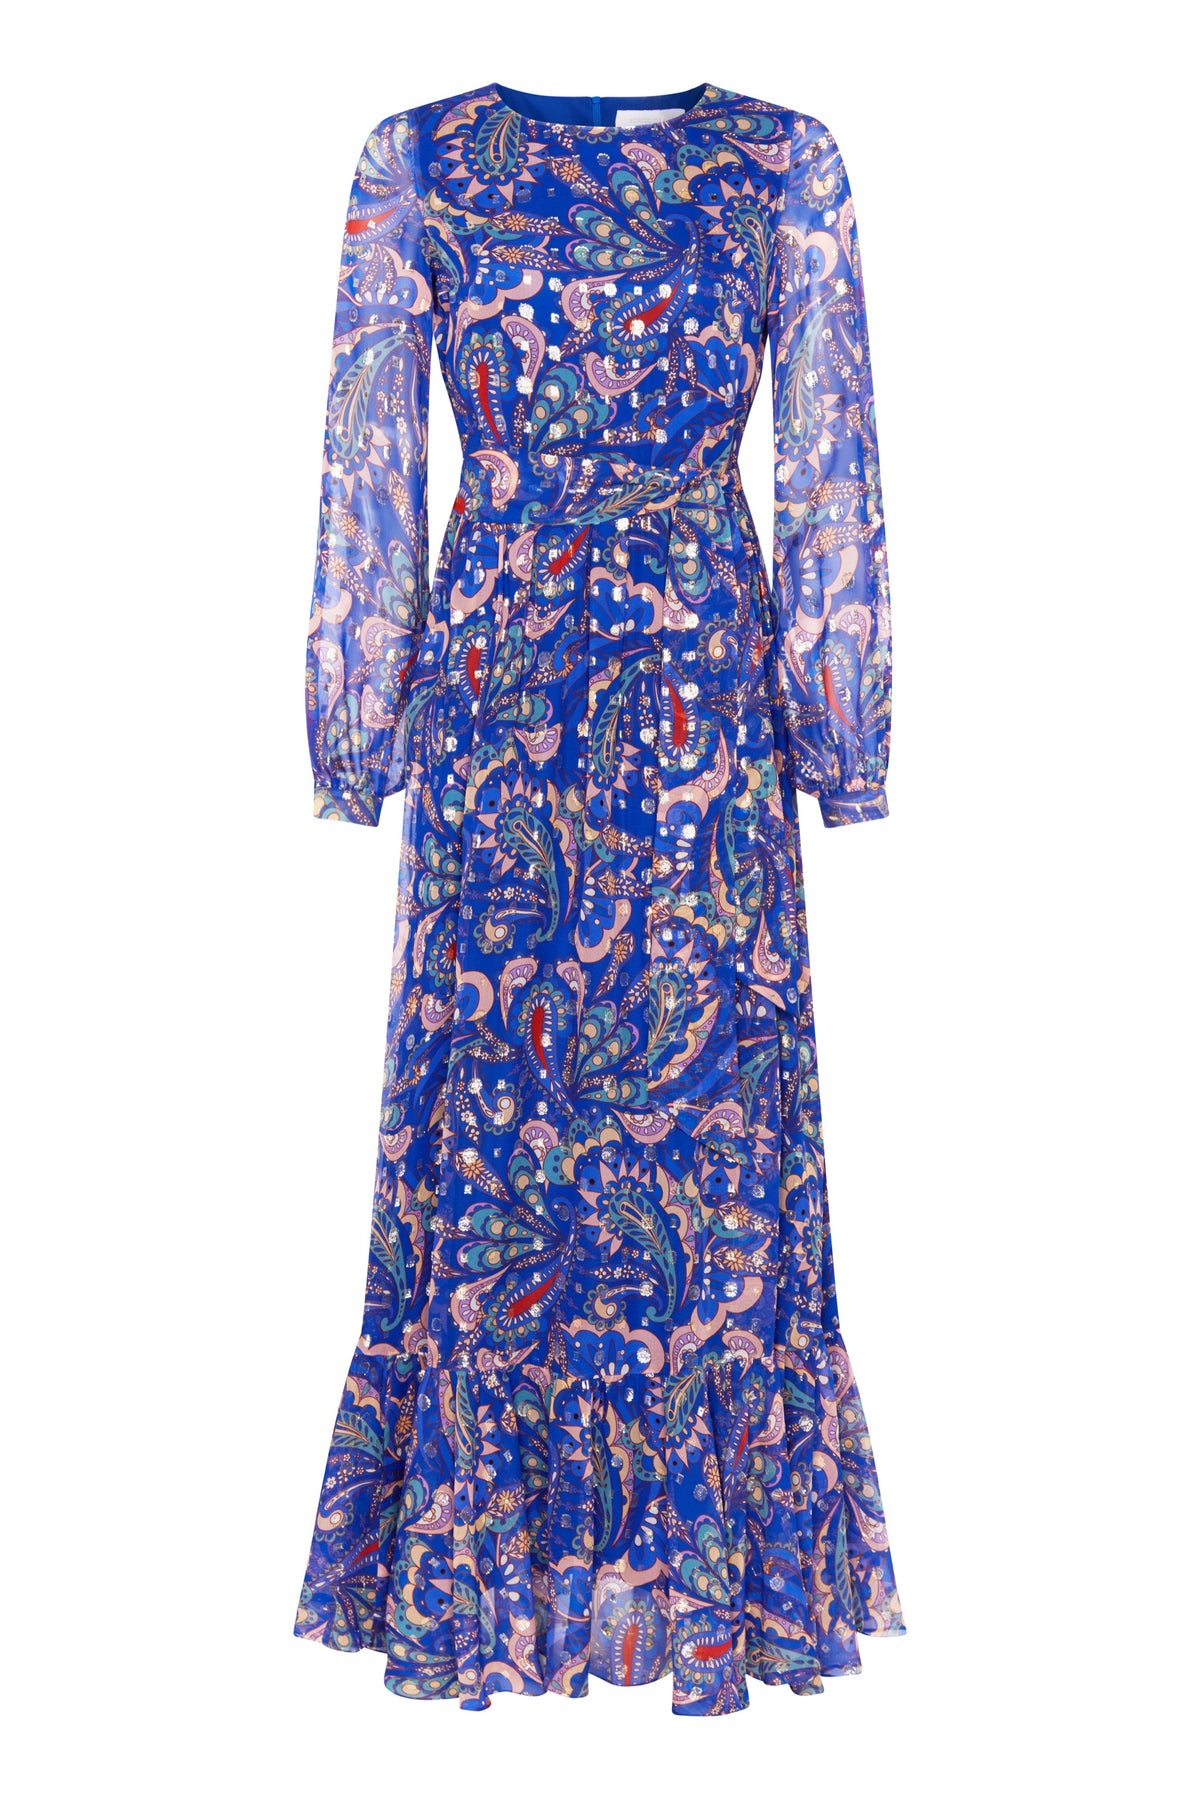 Dianora Chiffon Long Sleeved Maxi Dress in Paisley Blue